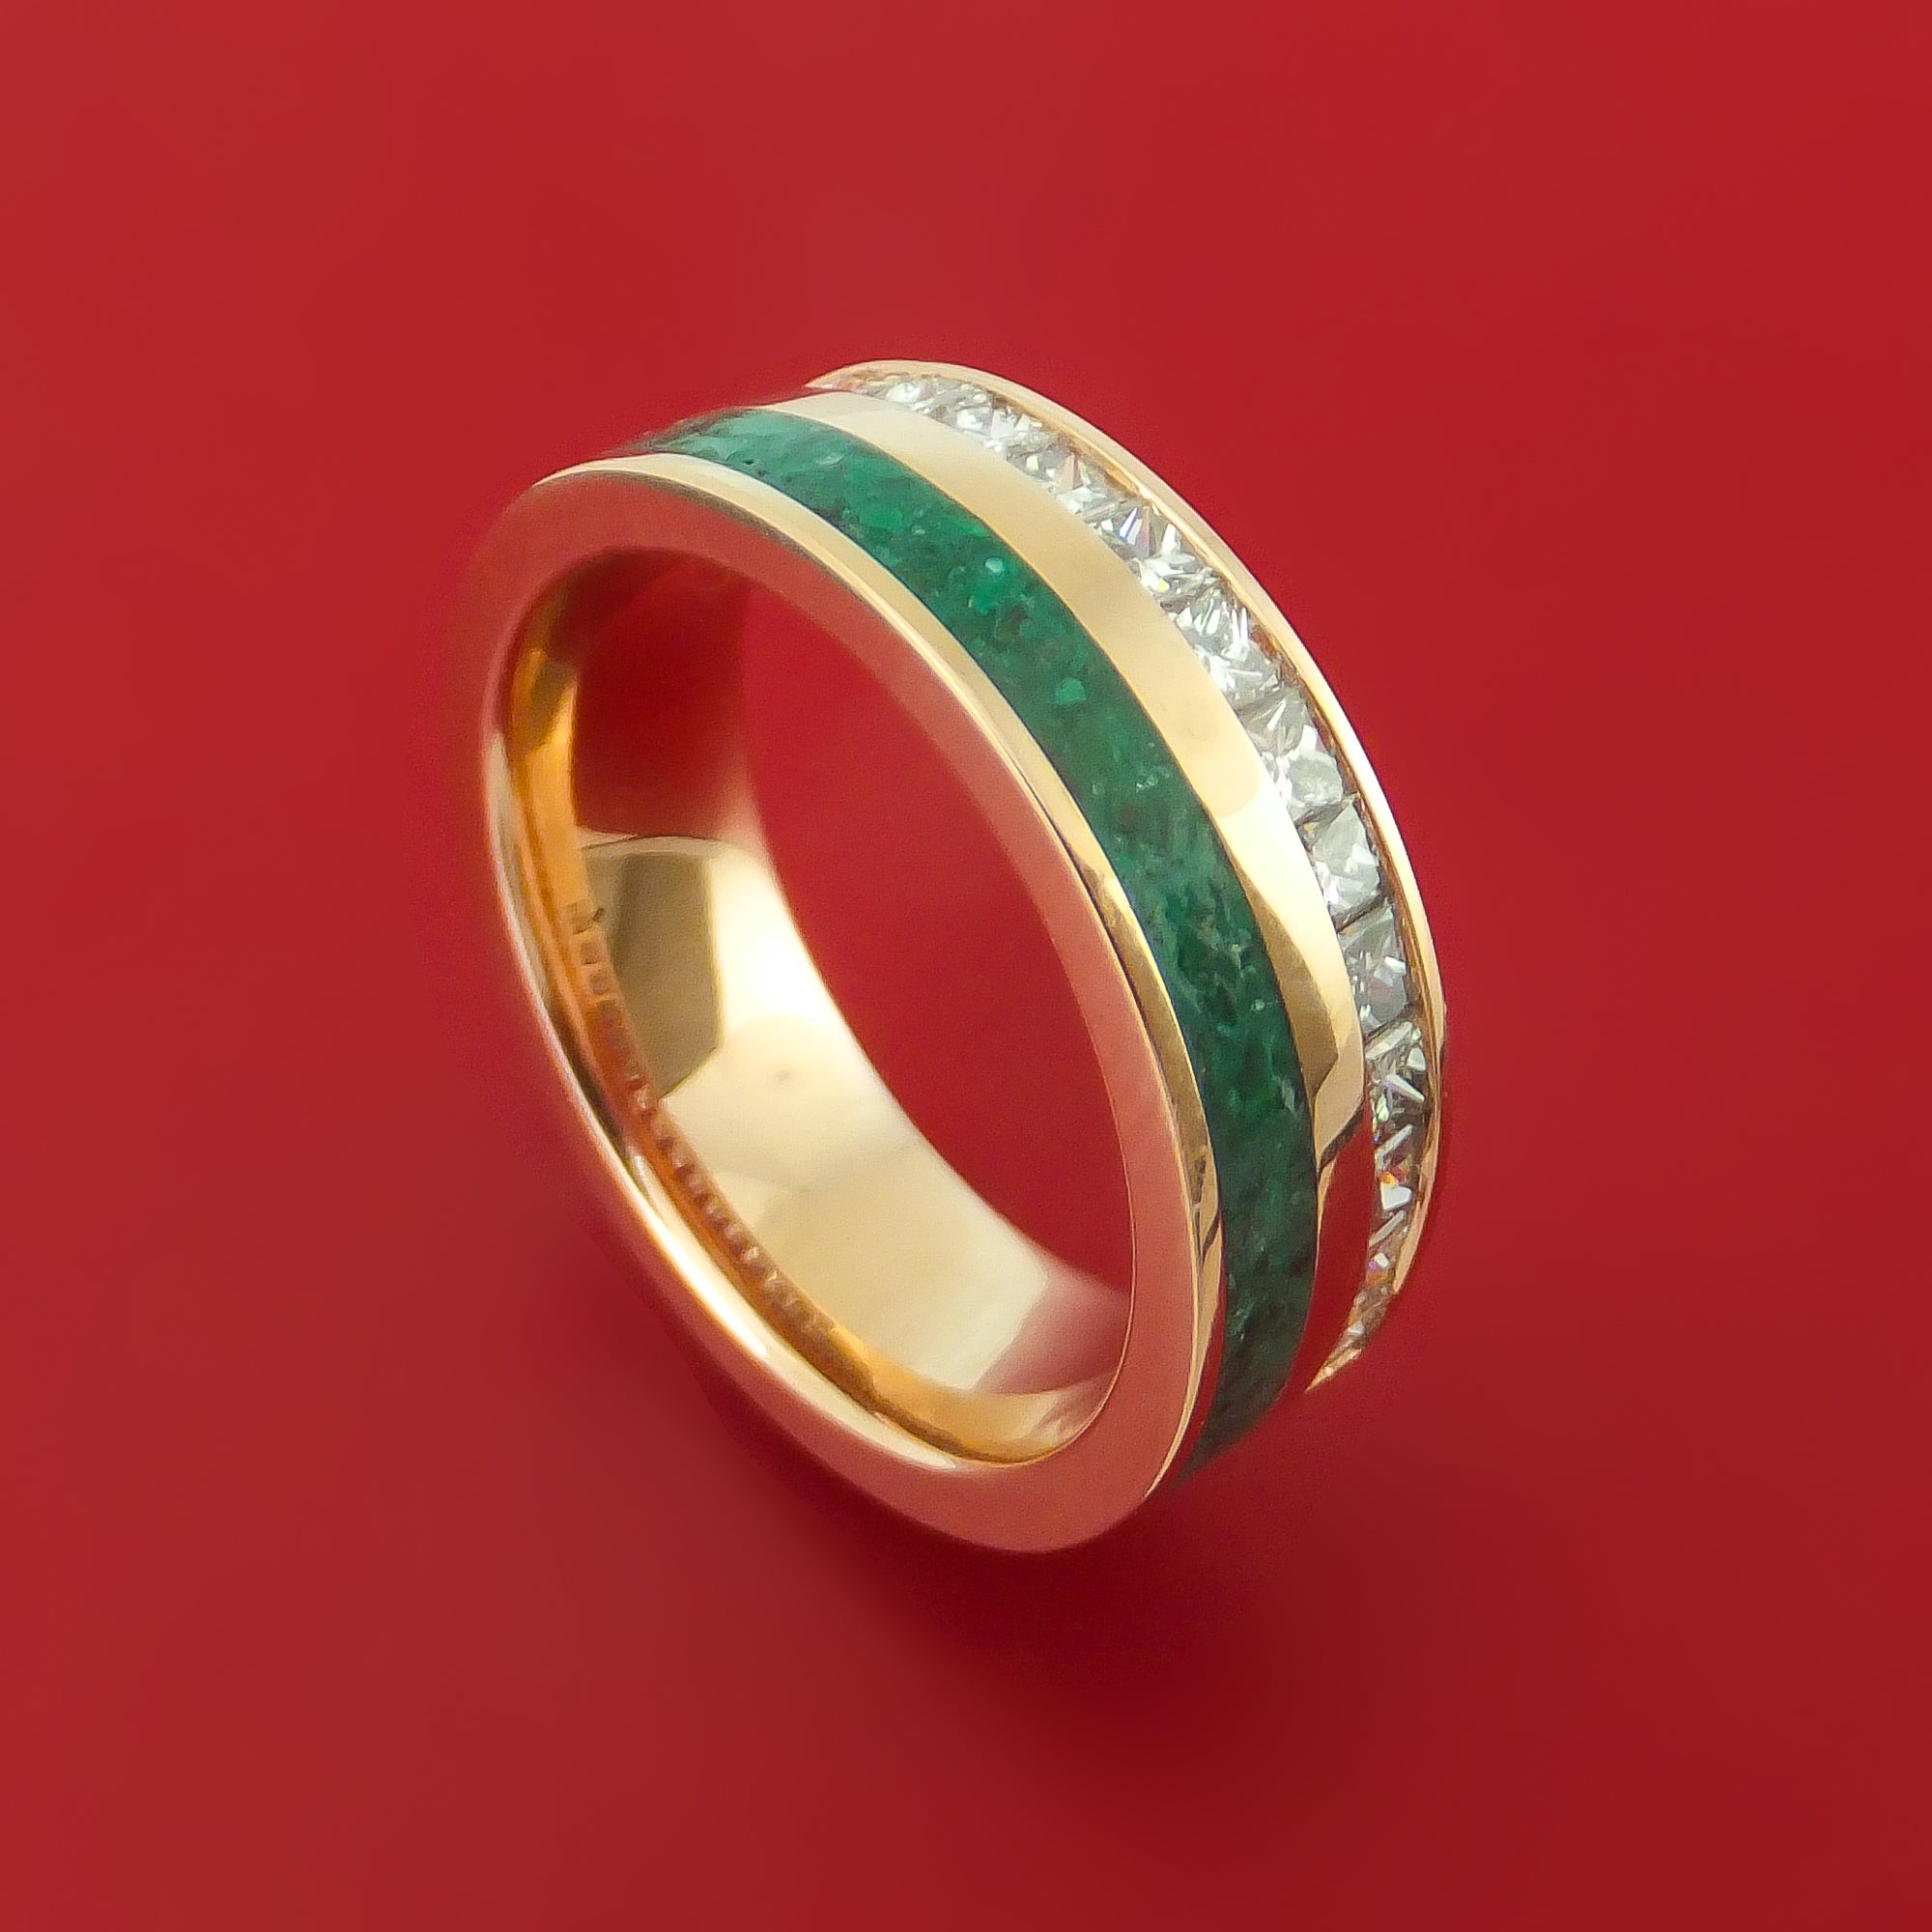 Handcrafted Teardrop Malachite Cocktail Ring in 22K Gold